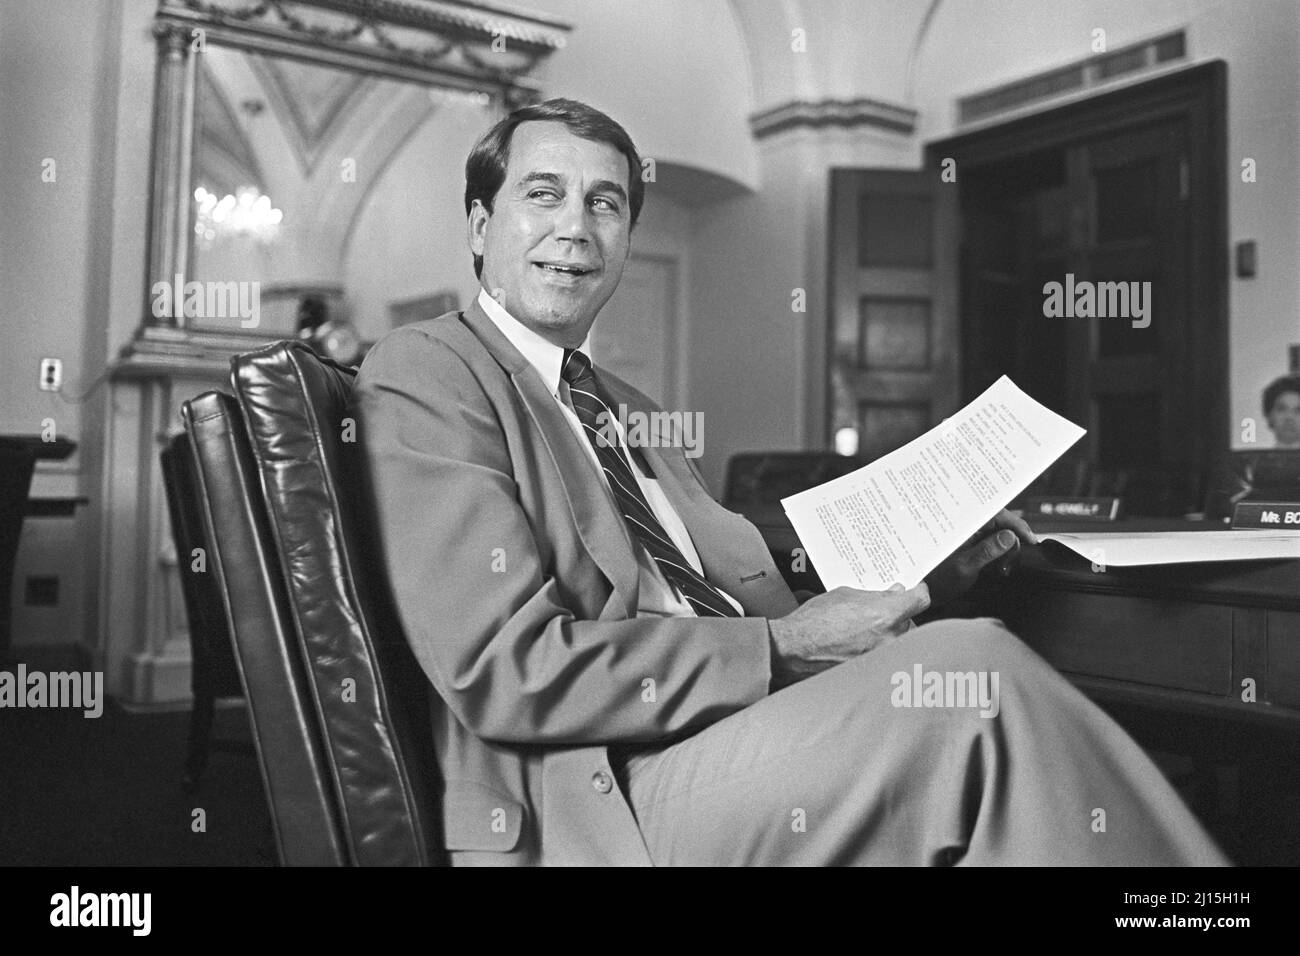 U.S. Congressman from Ohio John Boehner, seated at desk, holding a paper, Washington, D.C., USA, Laura Patterson, Roll Call Photograph Collection, May 1993 Stock Photo